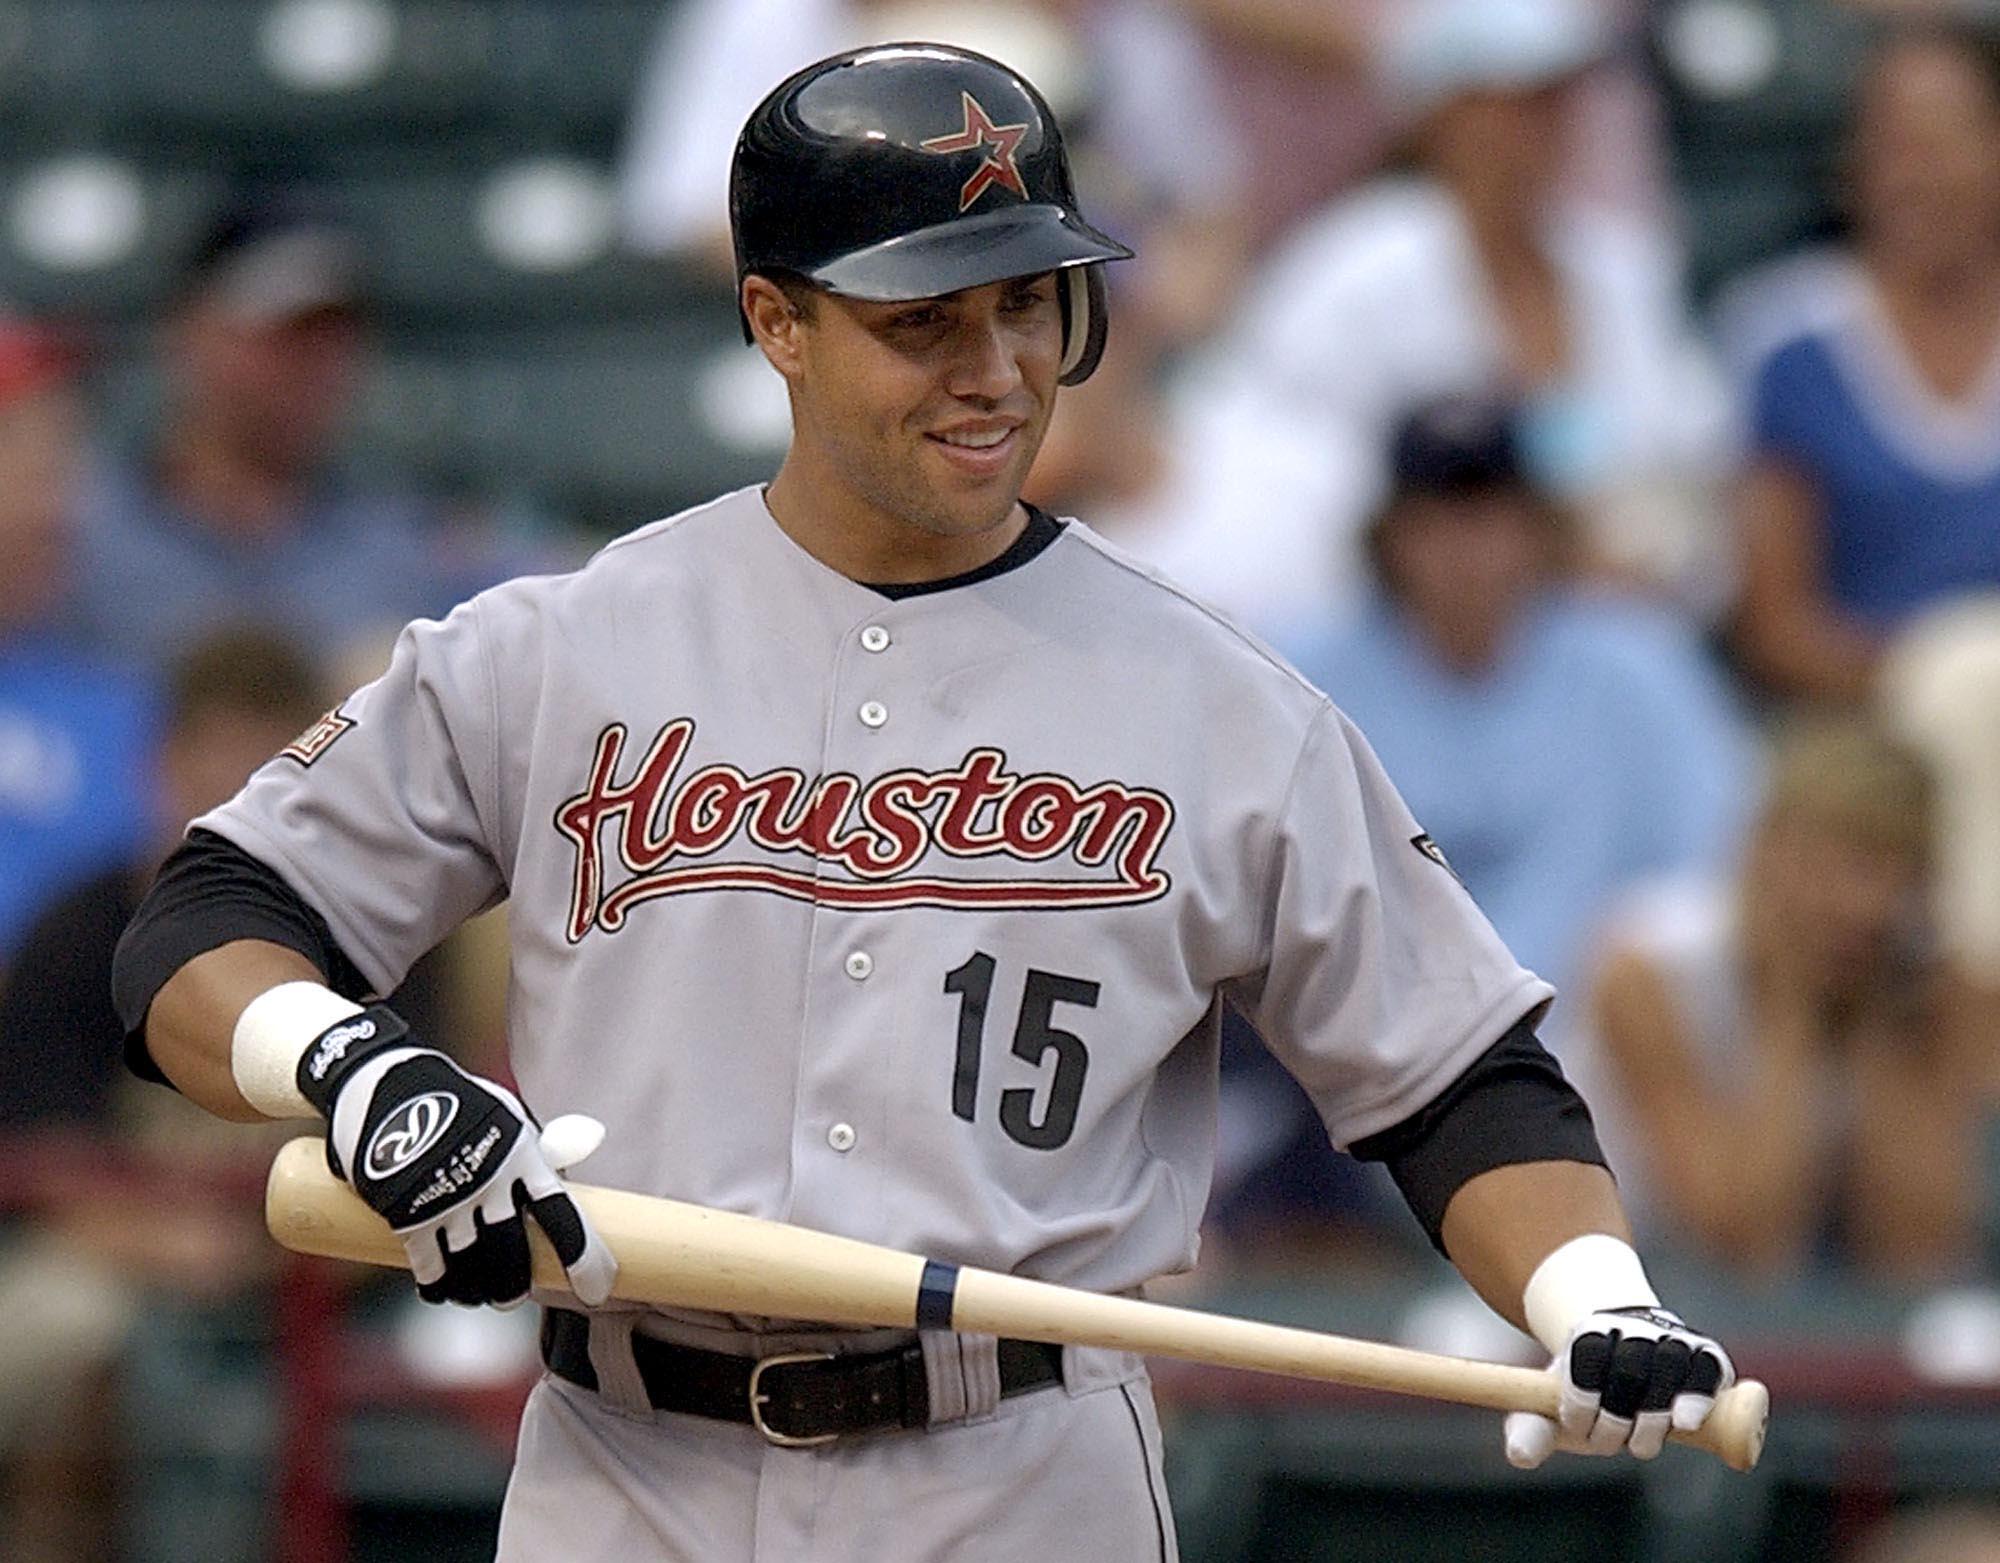 Brian McTaggart on X: Craig Biggio made his Major League debut on